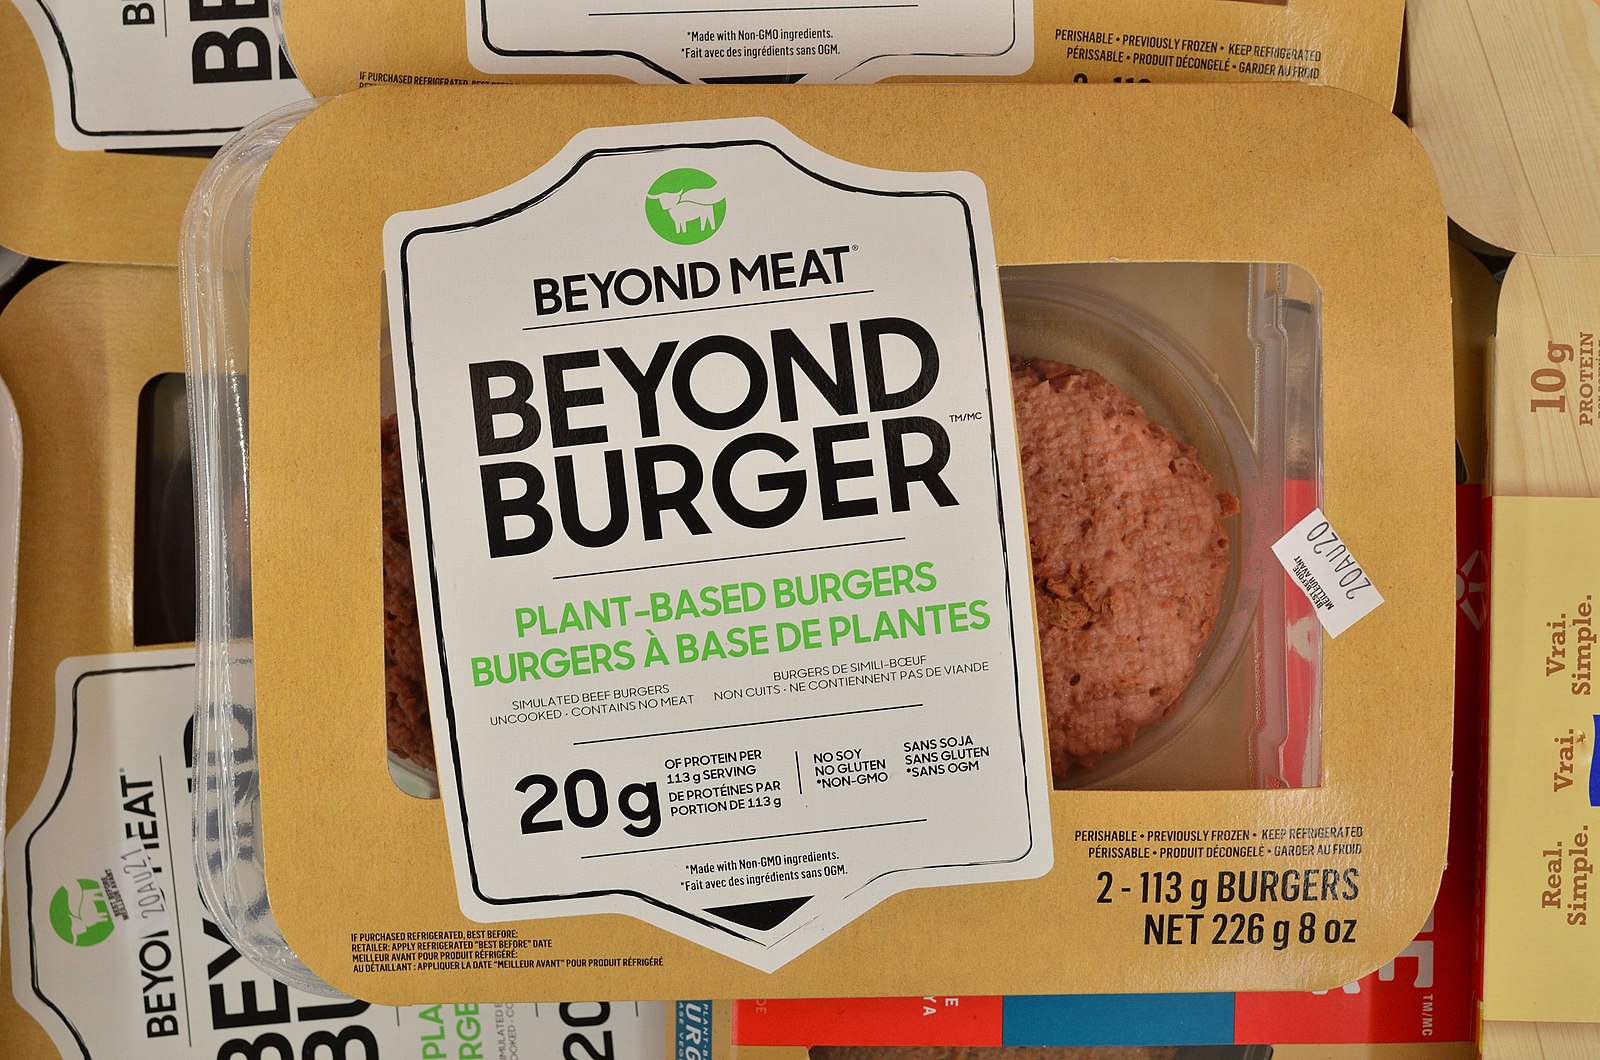 https://3ba1f5b2.rocketcdn.me/wp-content/uploads/2021/09/Difference-Between-Beyond-Meat-and-Real-Meat-.jpeg